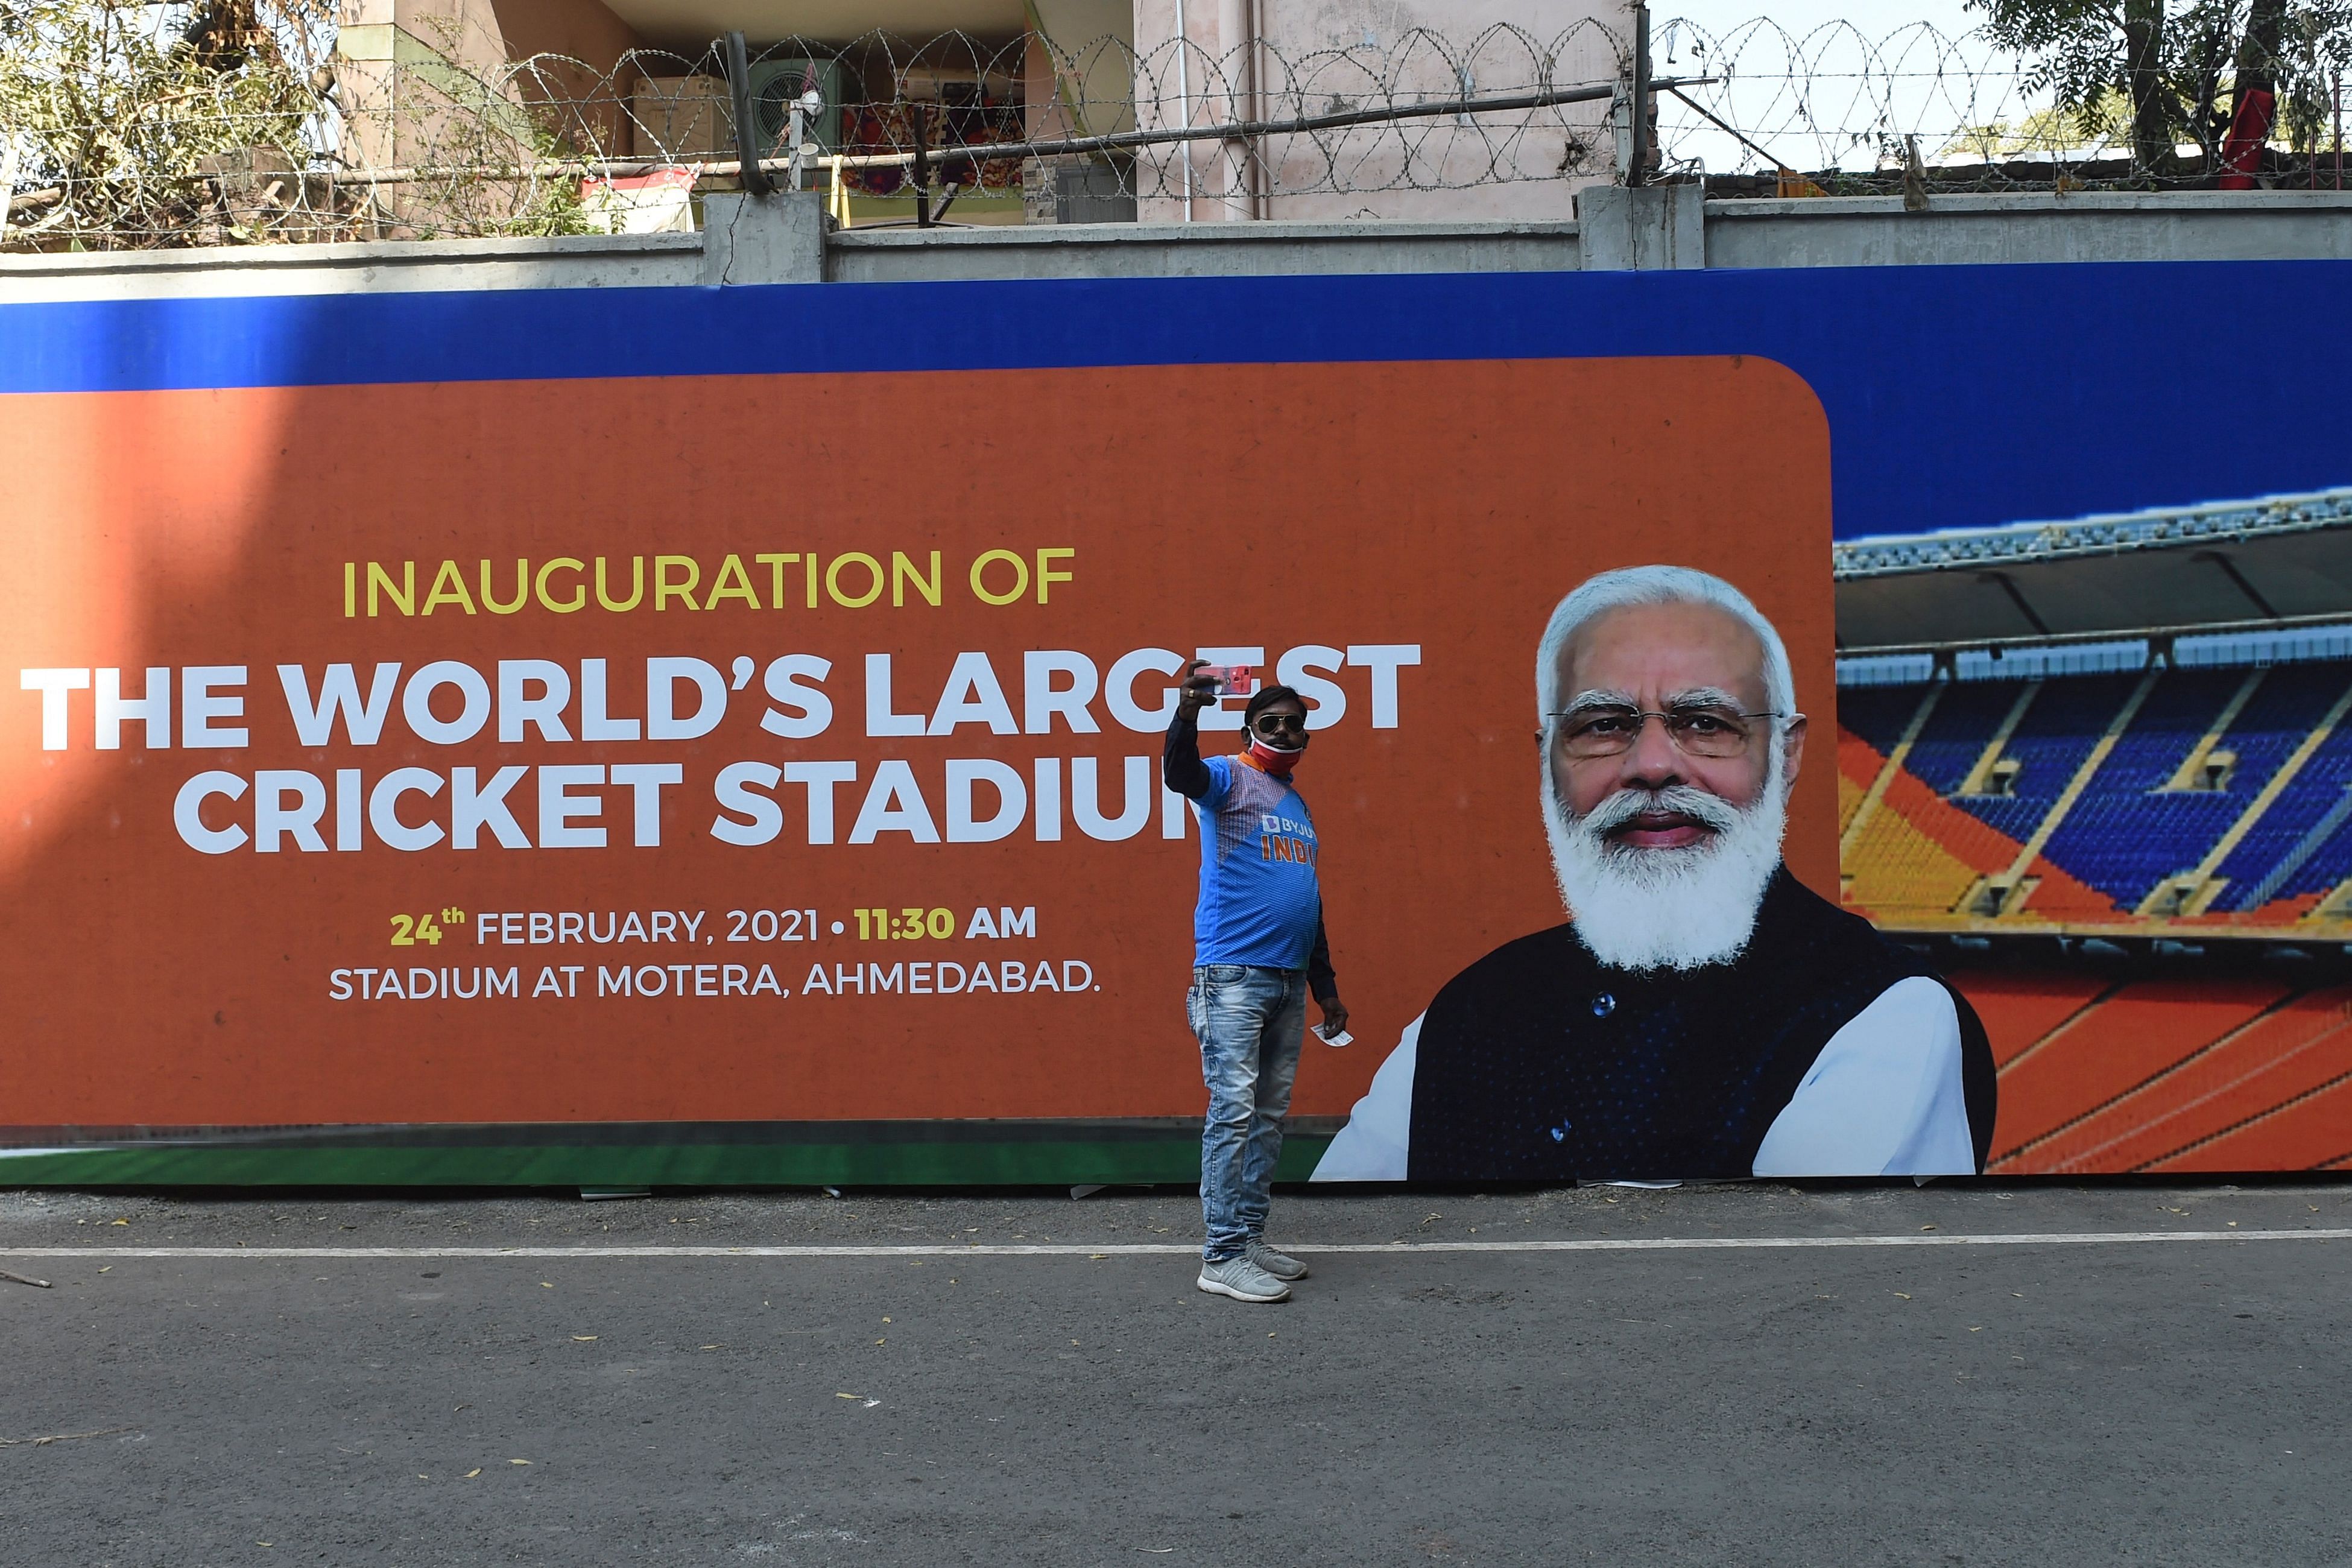 A Cricket fan takes a selfie picture in front of the newly named Naredra Modi Stadium, the world's biggest cricket stadium, on the first day of the third Test match between India and England, in Motera, on the outskirts of Ahmedabad on February 24, 2021. Credit: AFP Photo